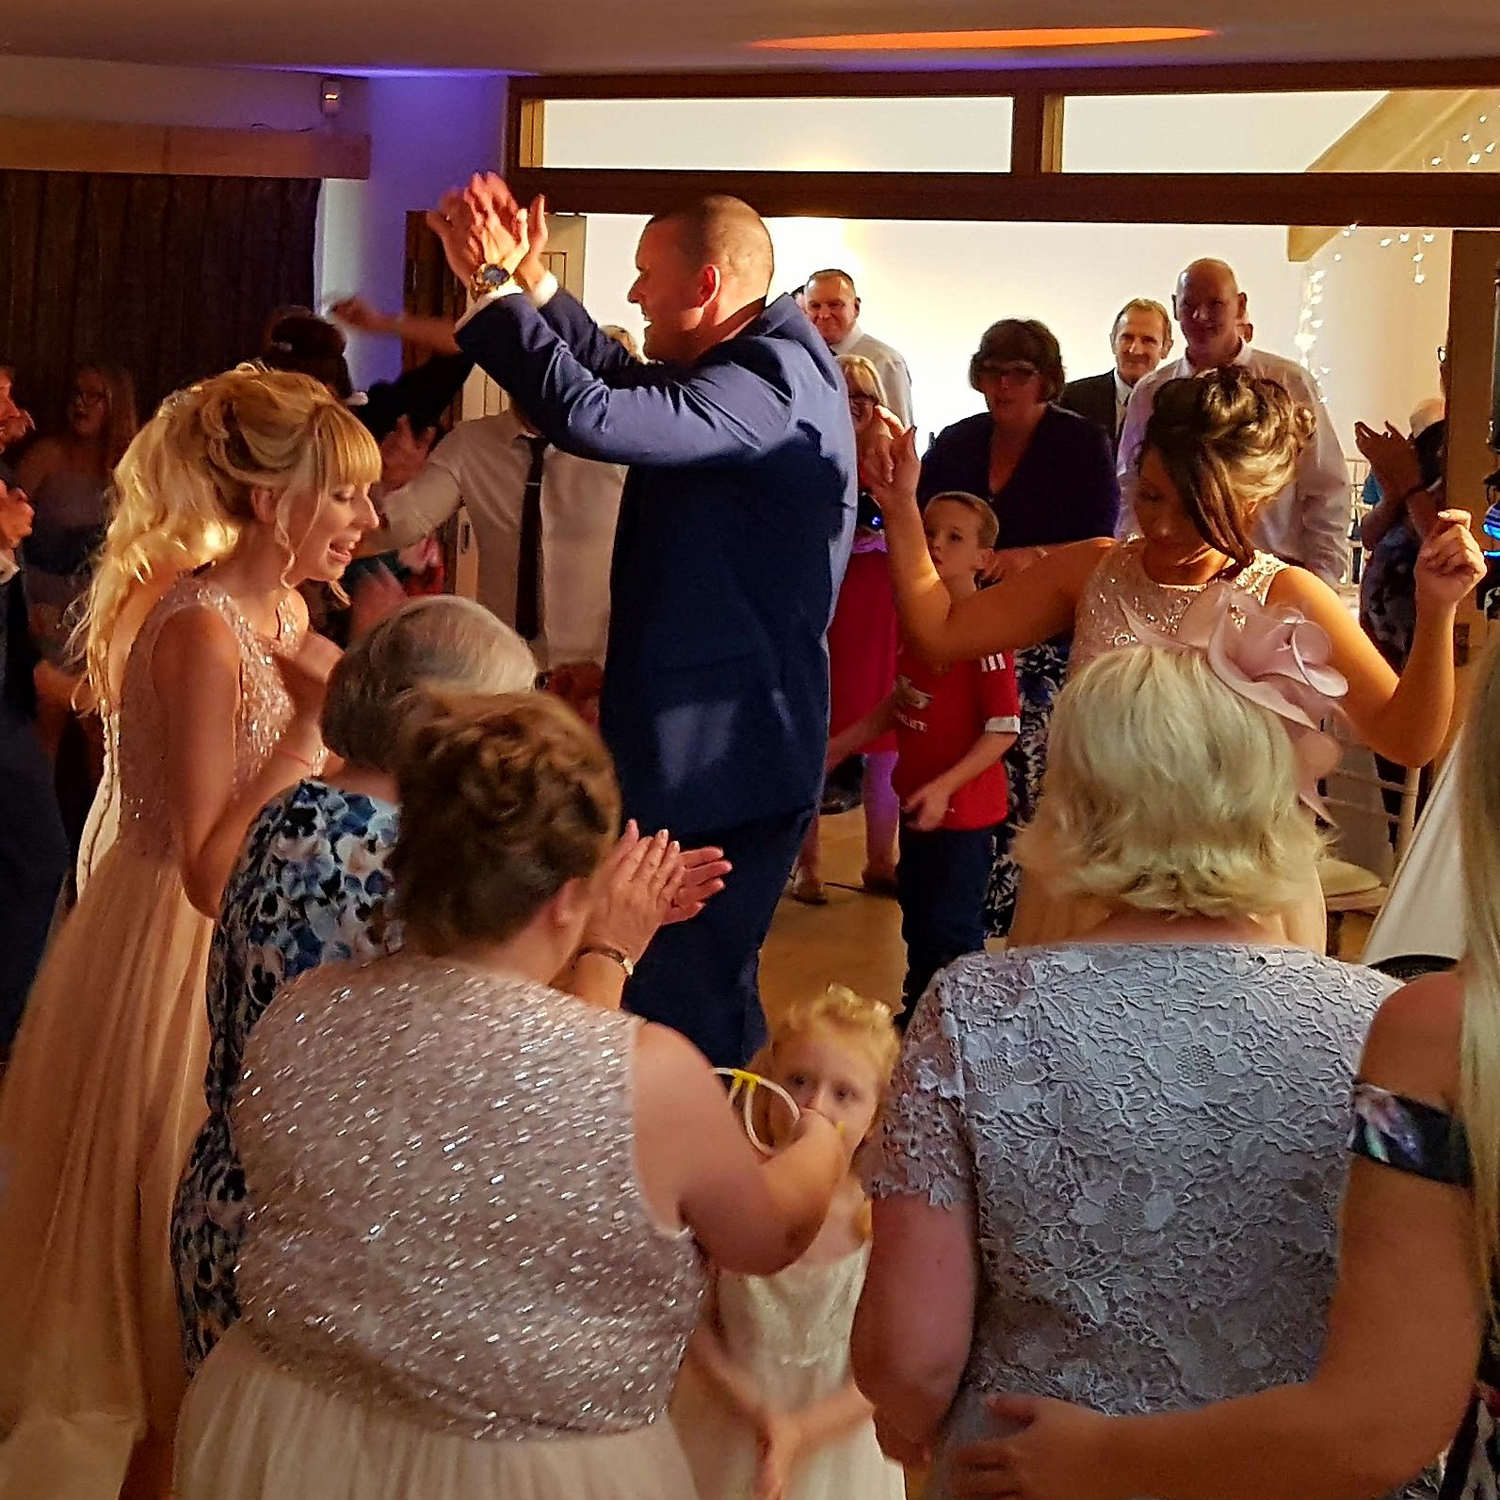 Happy dancing wedding guests surround smiling groom who claps his hands in the air at wedding near bristol.